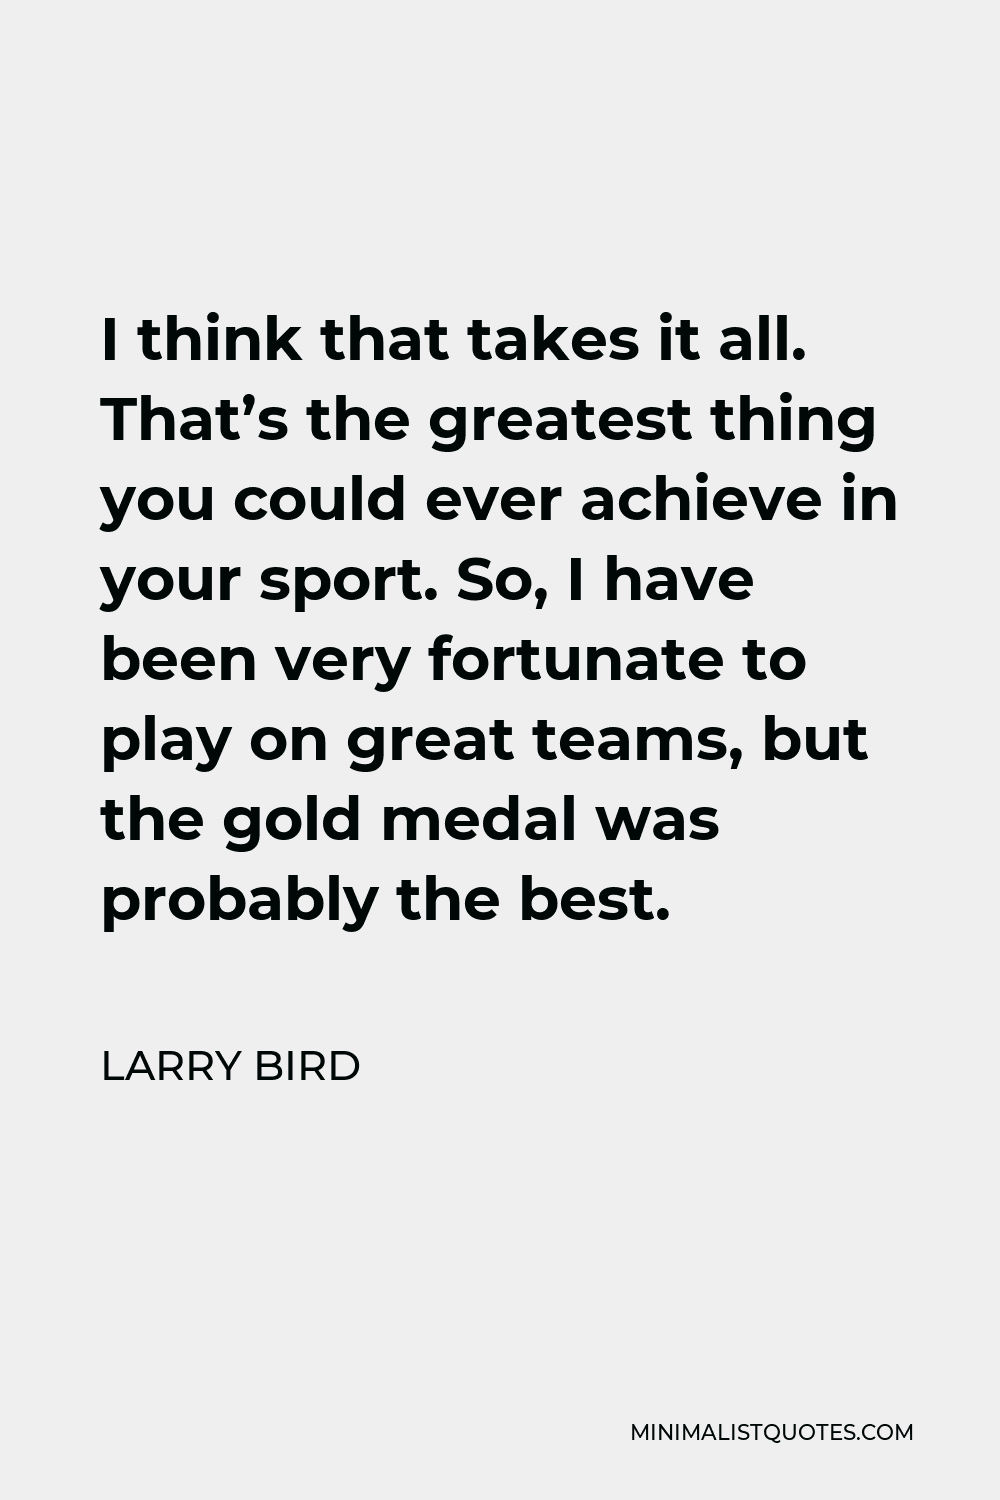 Larry Bird Quote - I think that takes it all. That’s the greatest thing you could ever achieve in your sport. So, I have been very fortunate to play on great teams, but the gold medal was probably the best.